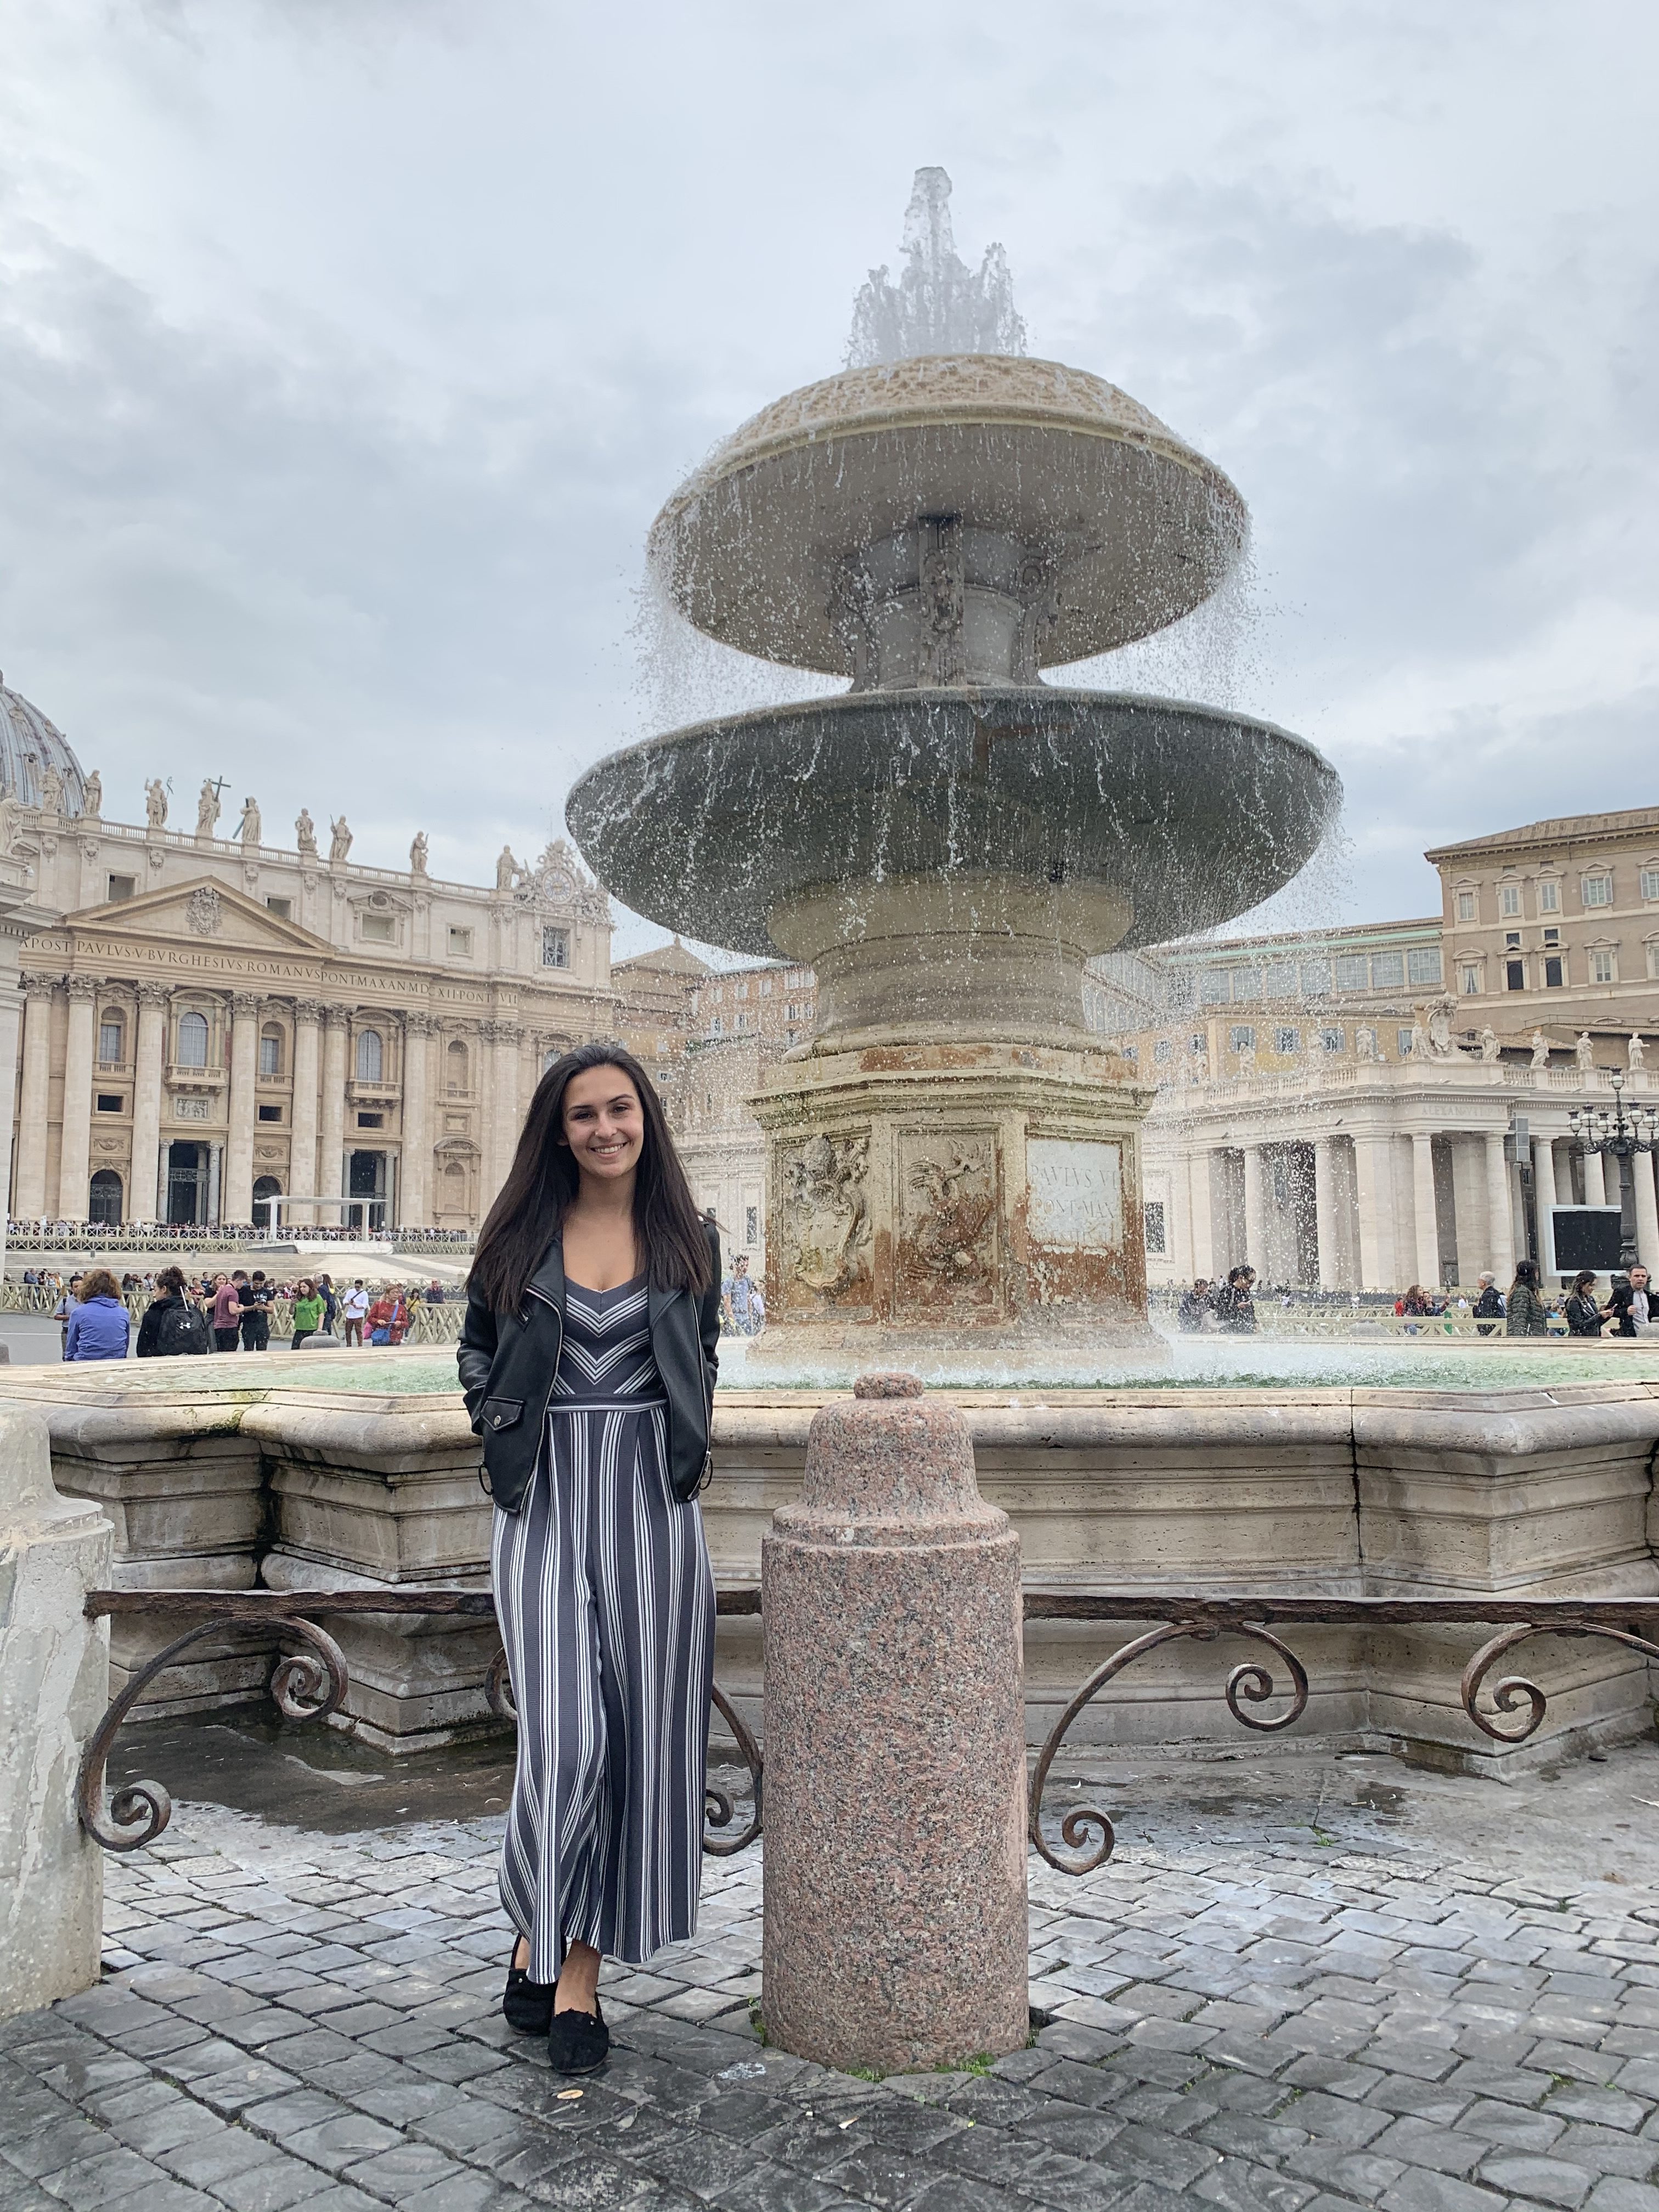 Me outside of the Vatican standing in front of a large fountain.